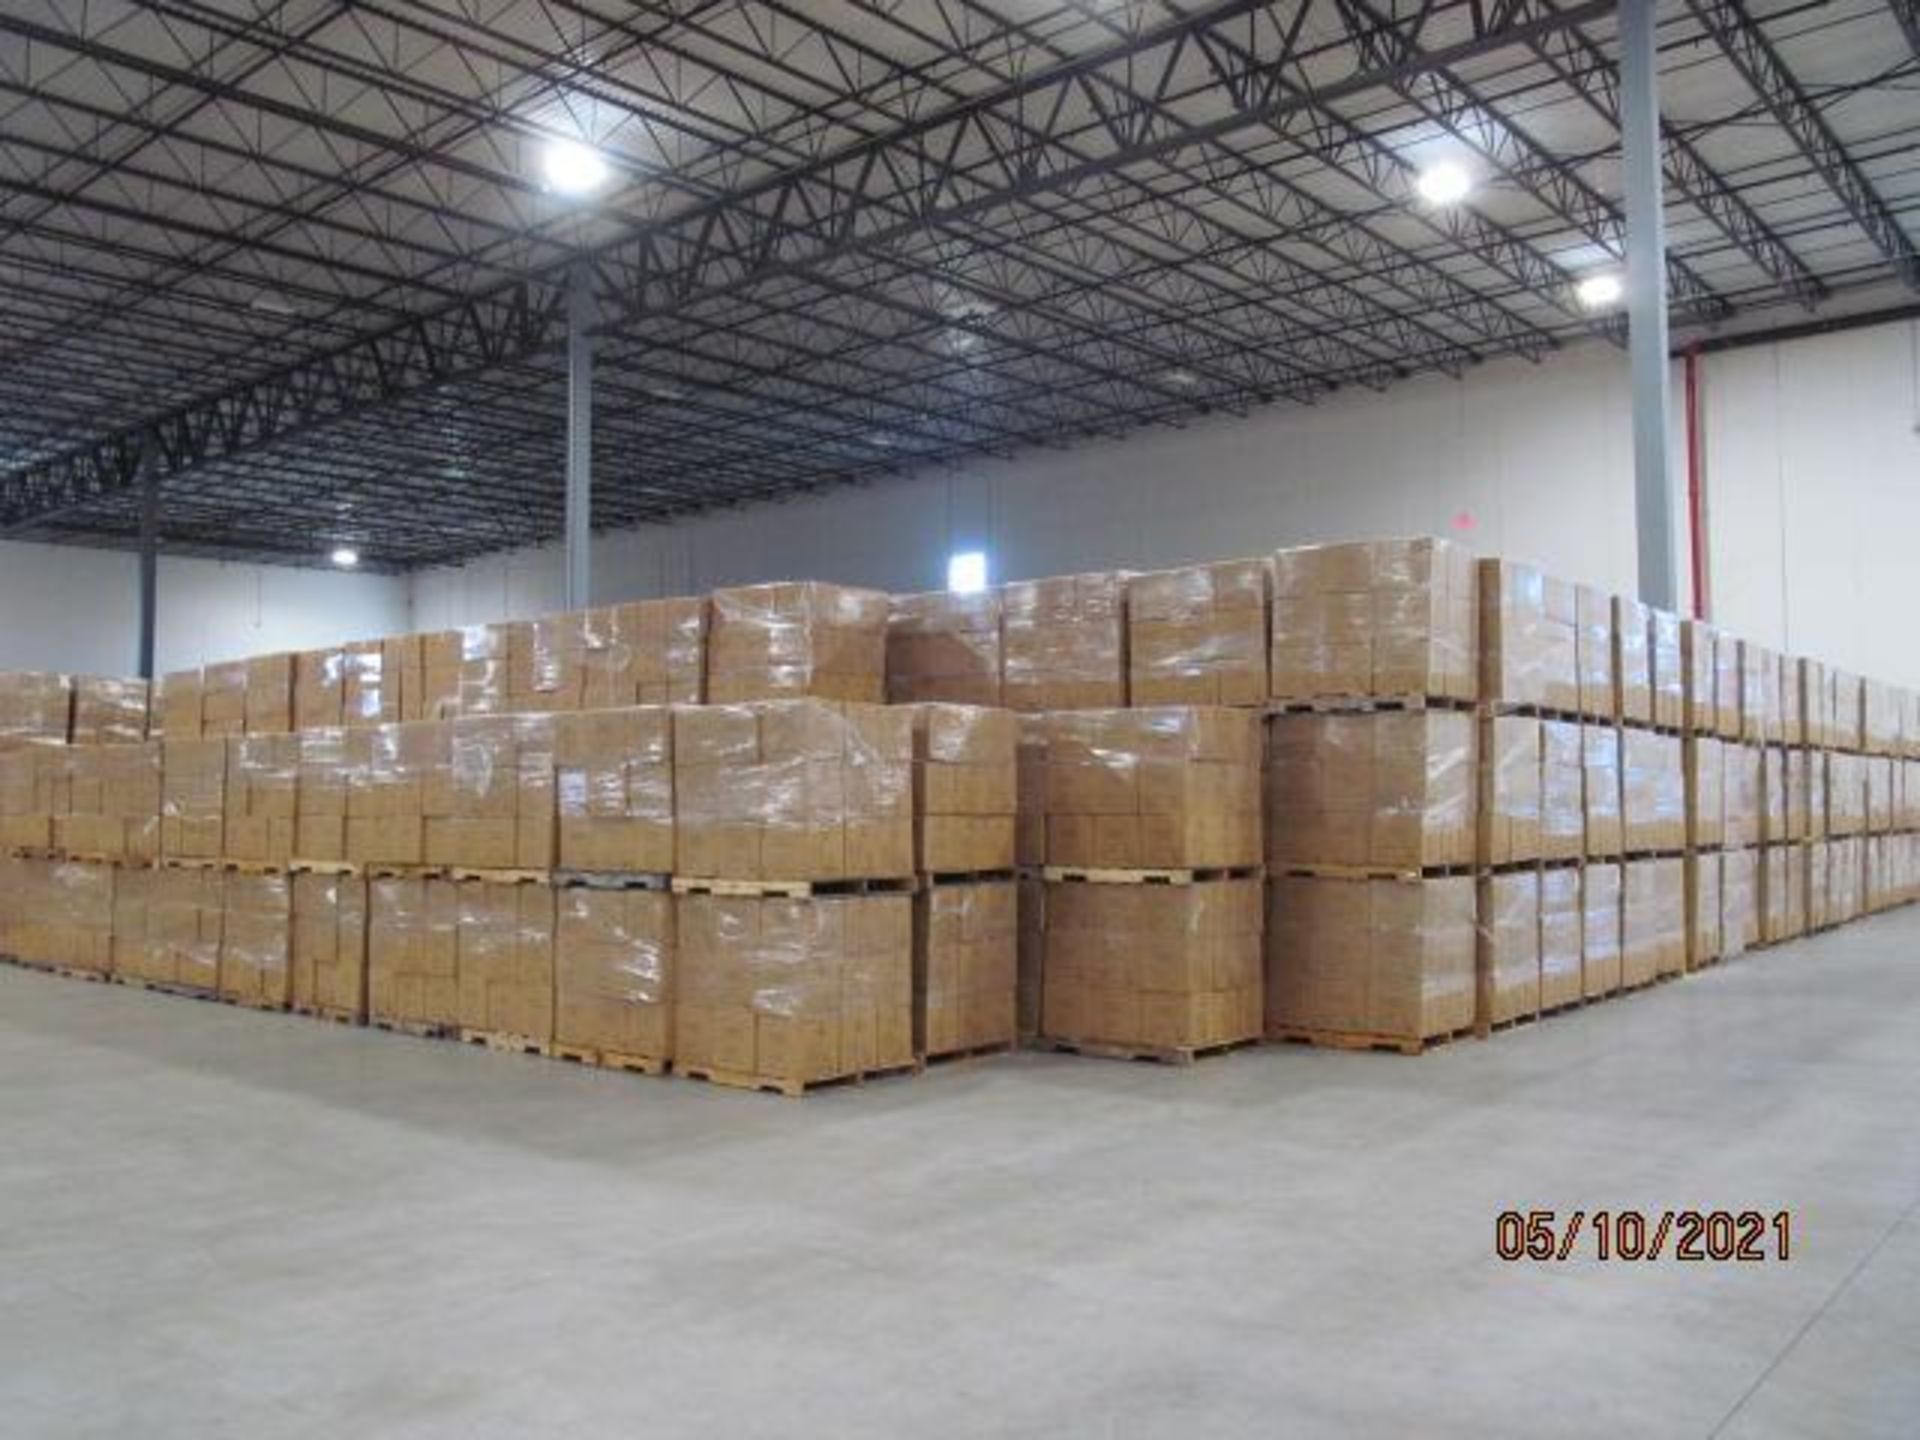 Lot of Waxman Kleen Freak Sanitizing Wipes consisting of 29,027 packages on 45 pallets. Each package - Image 11 of 11